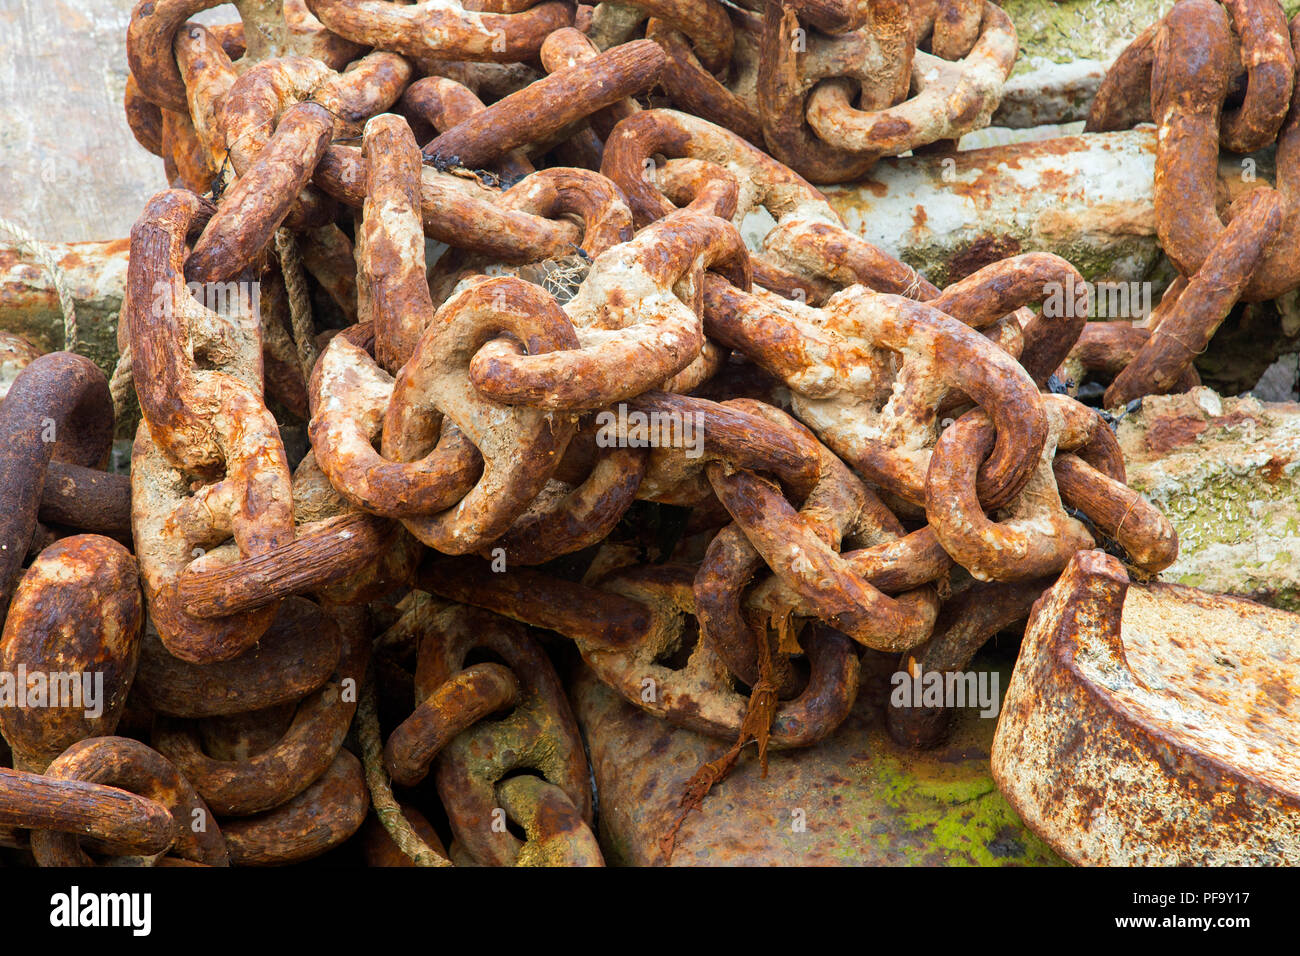 Rusty iron chains in a heap on rocks shot from above Stock Photo